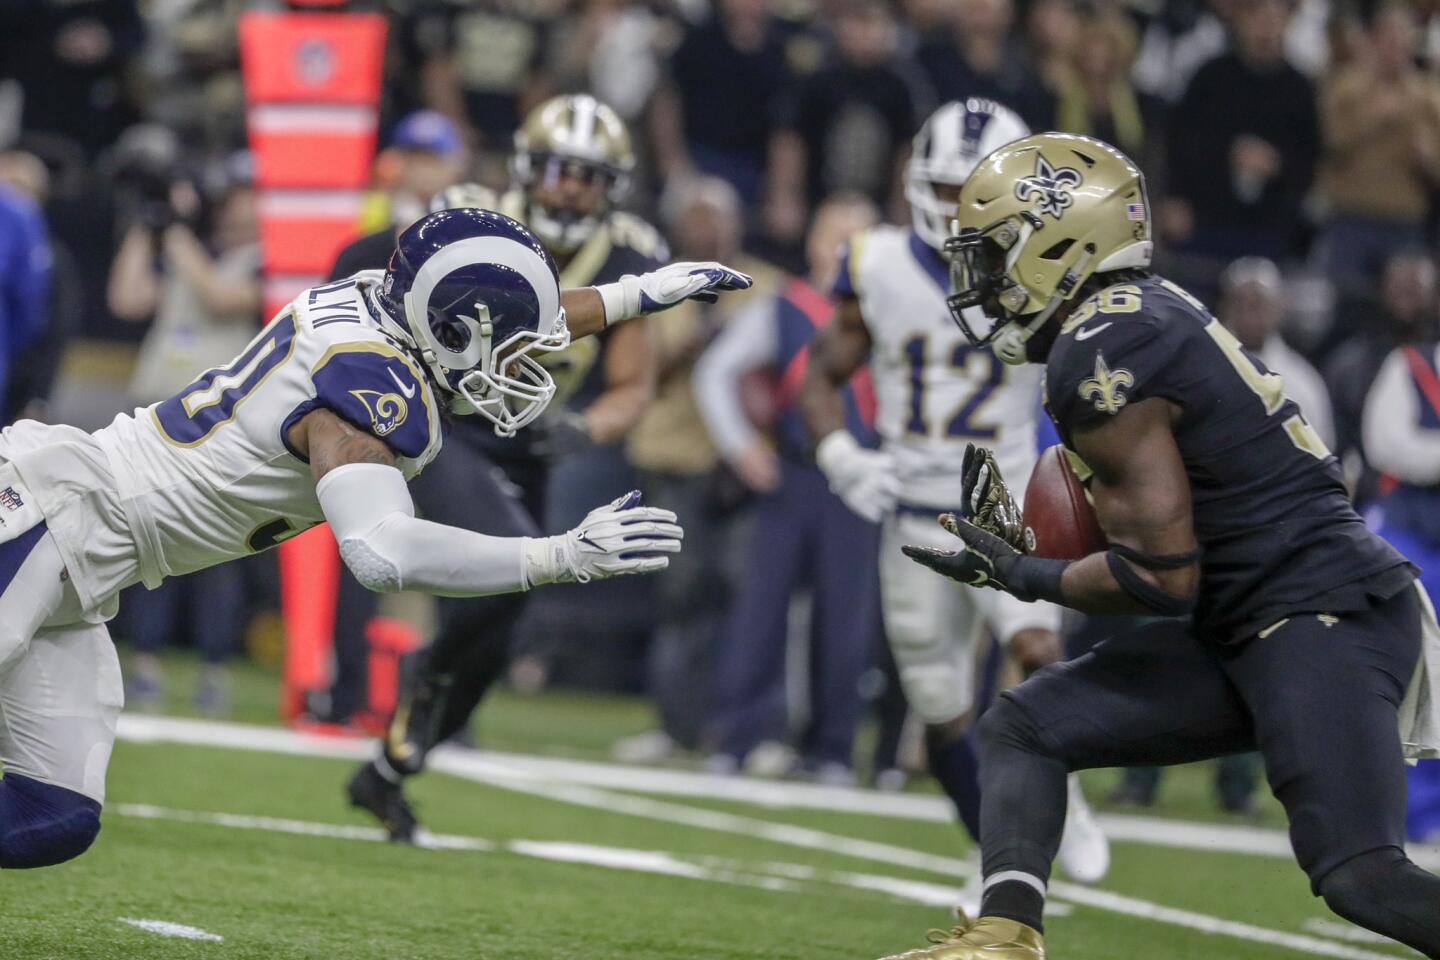 Saints linebacker Demario Davis intercepts a pass intended for Rams running back Todd Gurley early in the first quarter in the NFC Championship on Jan. 20.